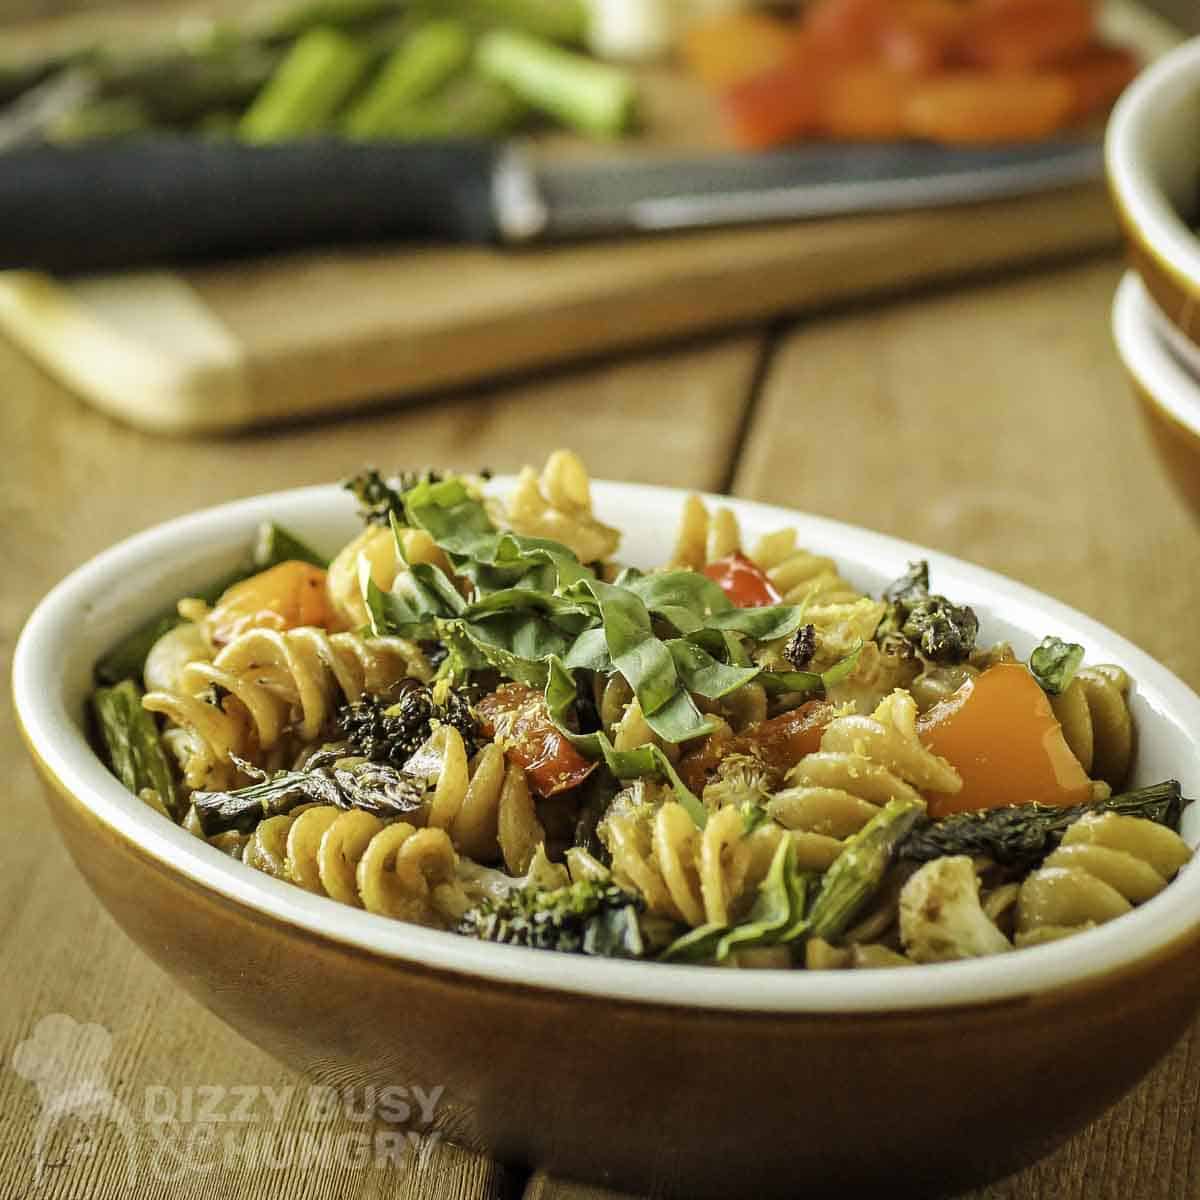 Side shot of veggie rotini in an orange and white oval bowl with chopped veggies on a wooden cutting board in the background.